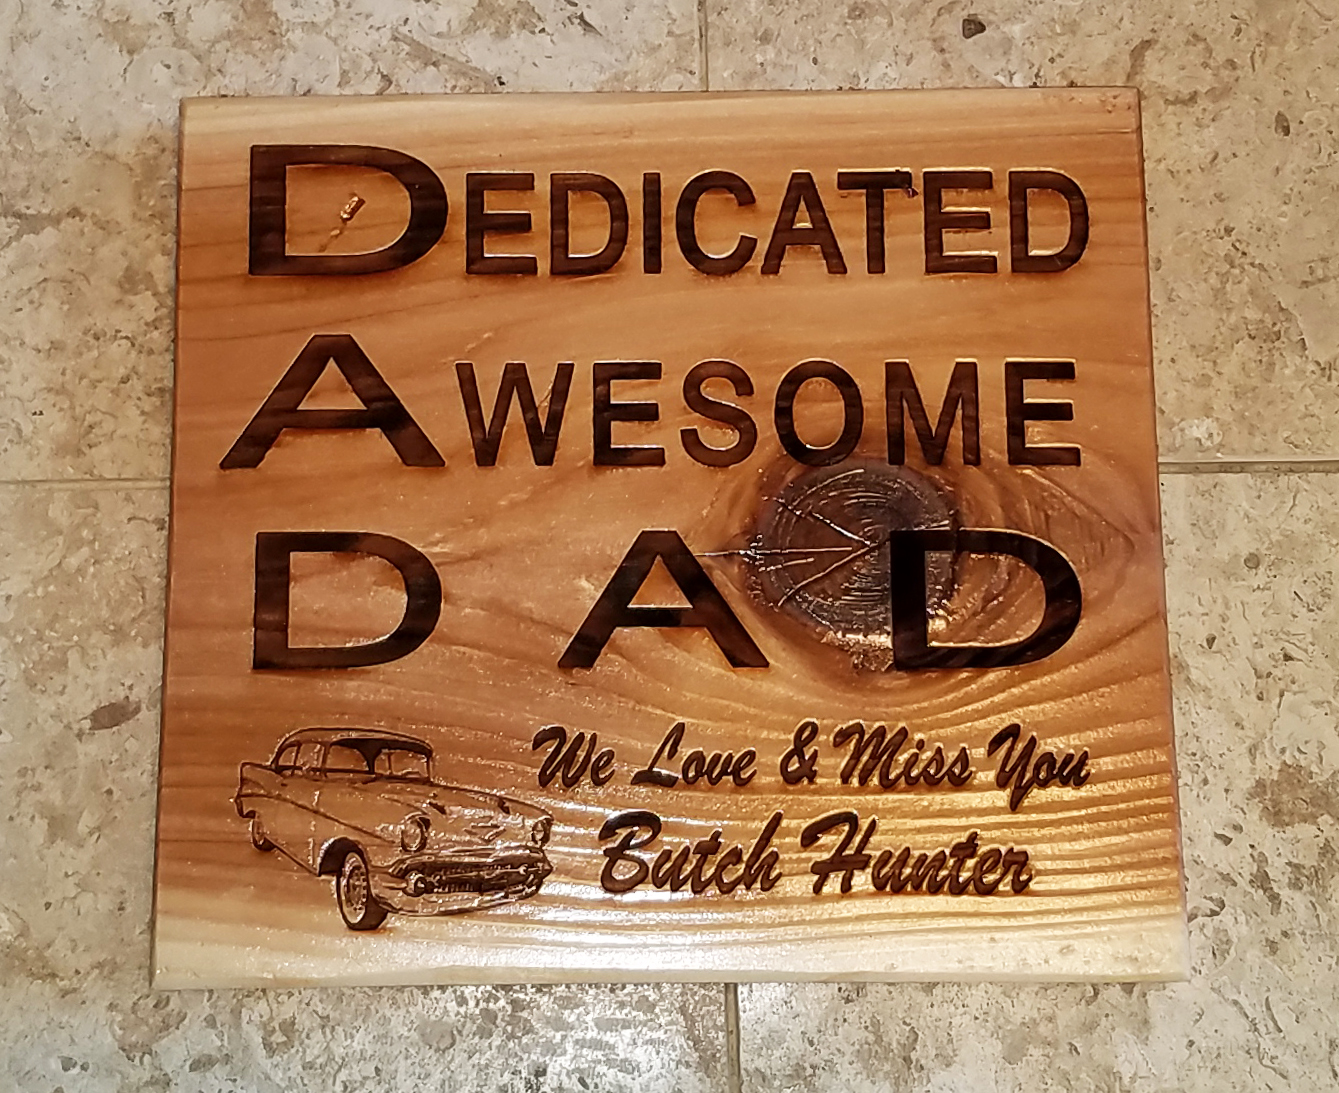 Dedicated Awesome Dad Memorial Plaque Laser Engraved and Etched on to Cedar Wood Board and Sprayed with a High-Gloss Clear Coating